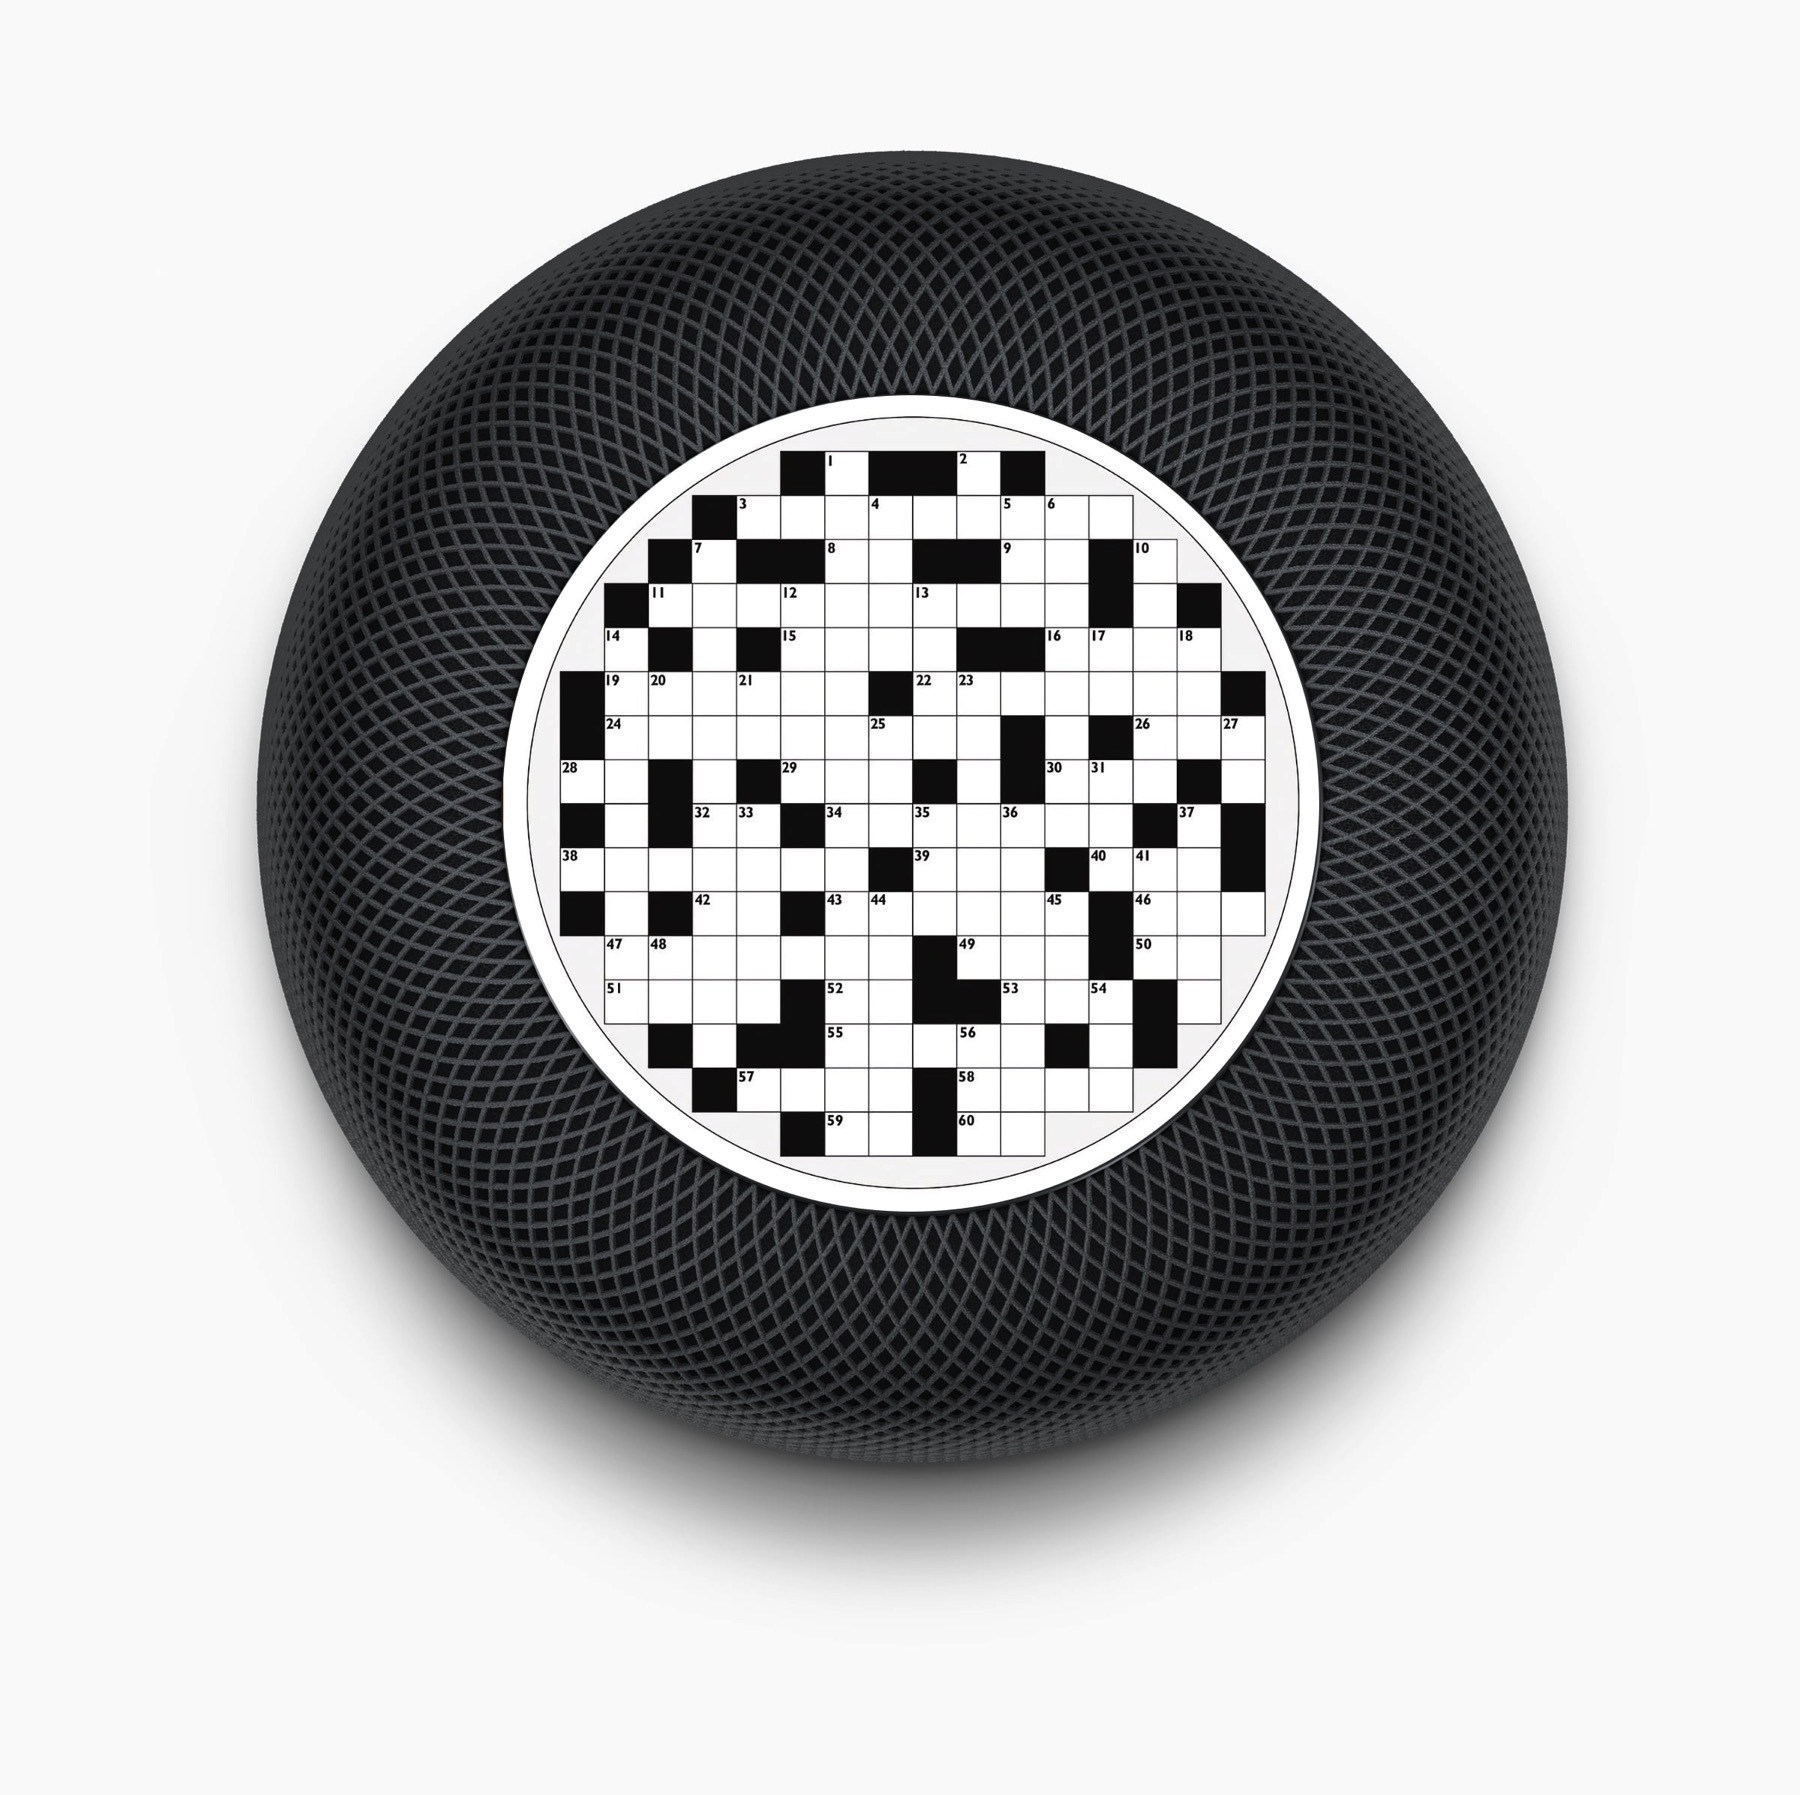 Crossword game on the top of a black HomePod